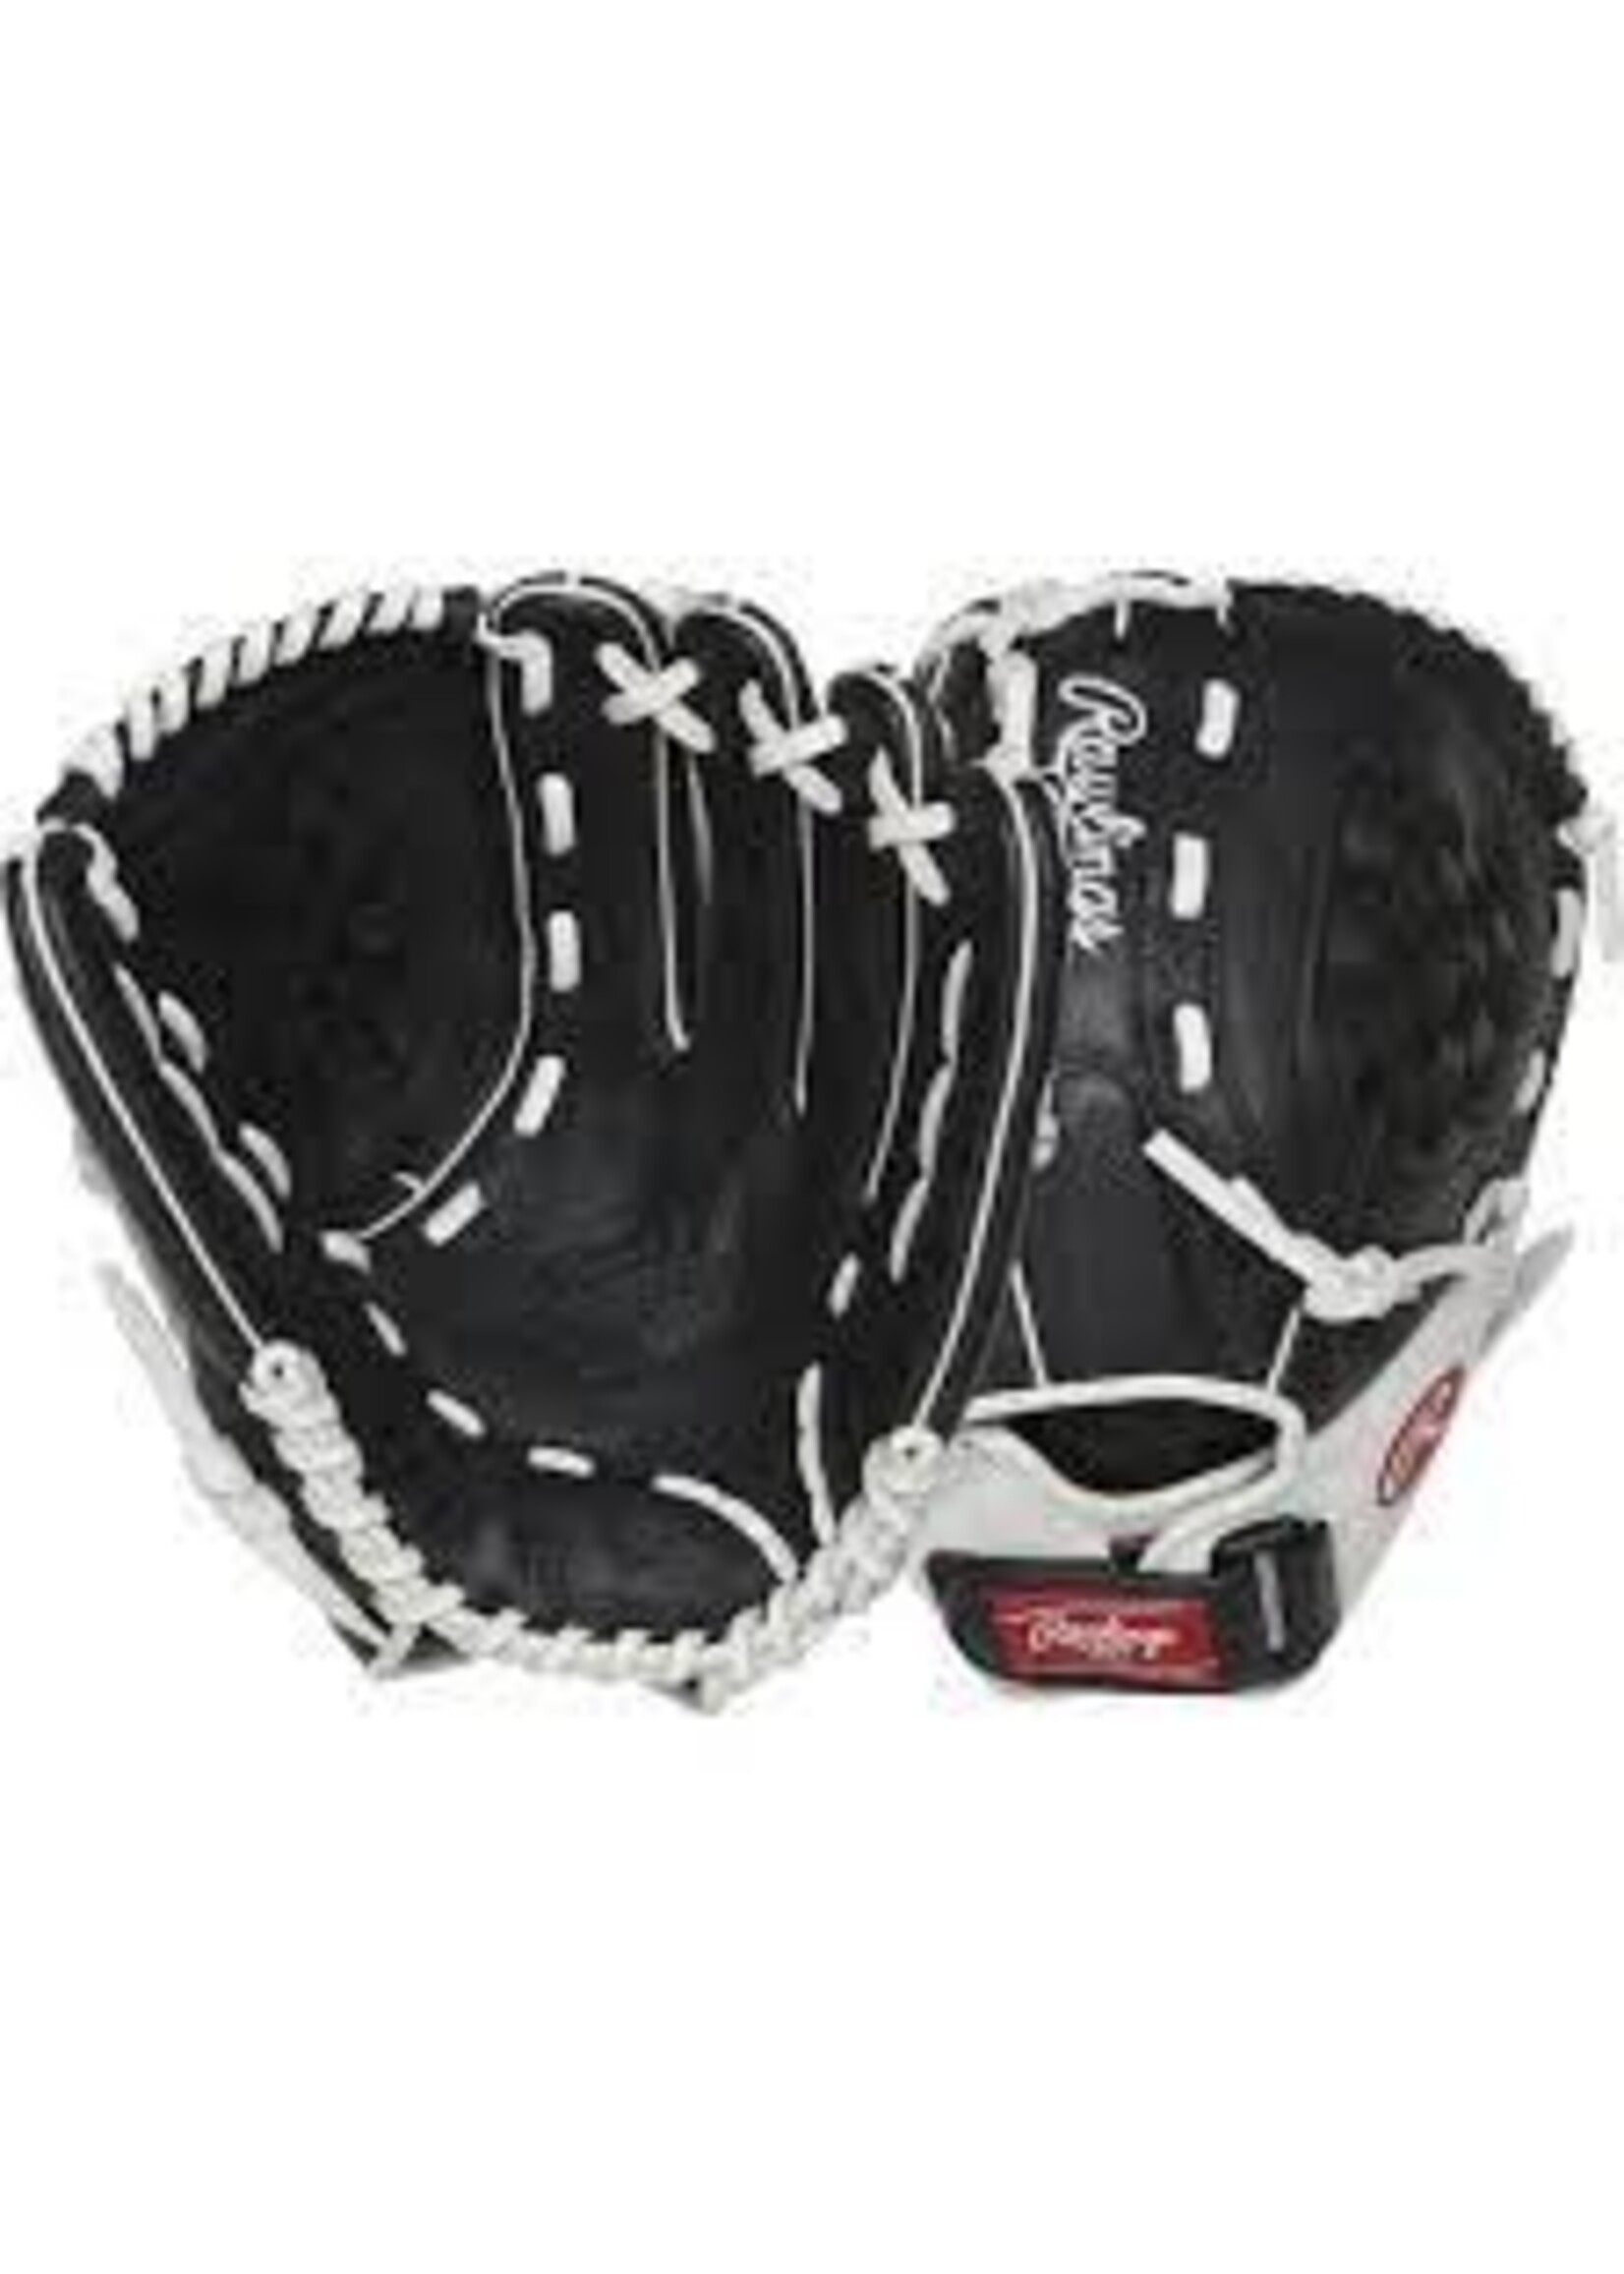 RAWLINGS RAWLINGS SHUT OUT 12.5-INCH OUTFIELD/PITCHER'S GLOVE RSO125BW